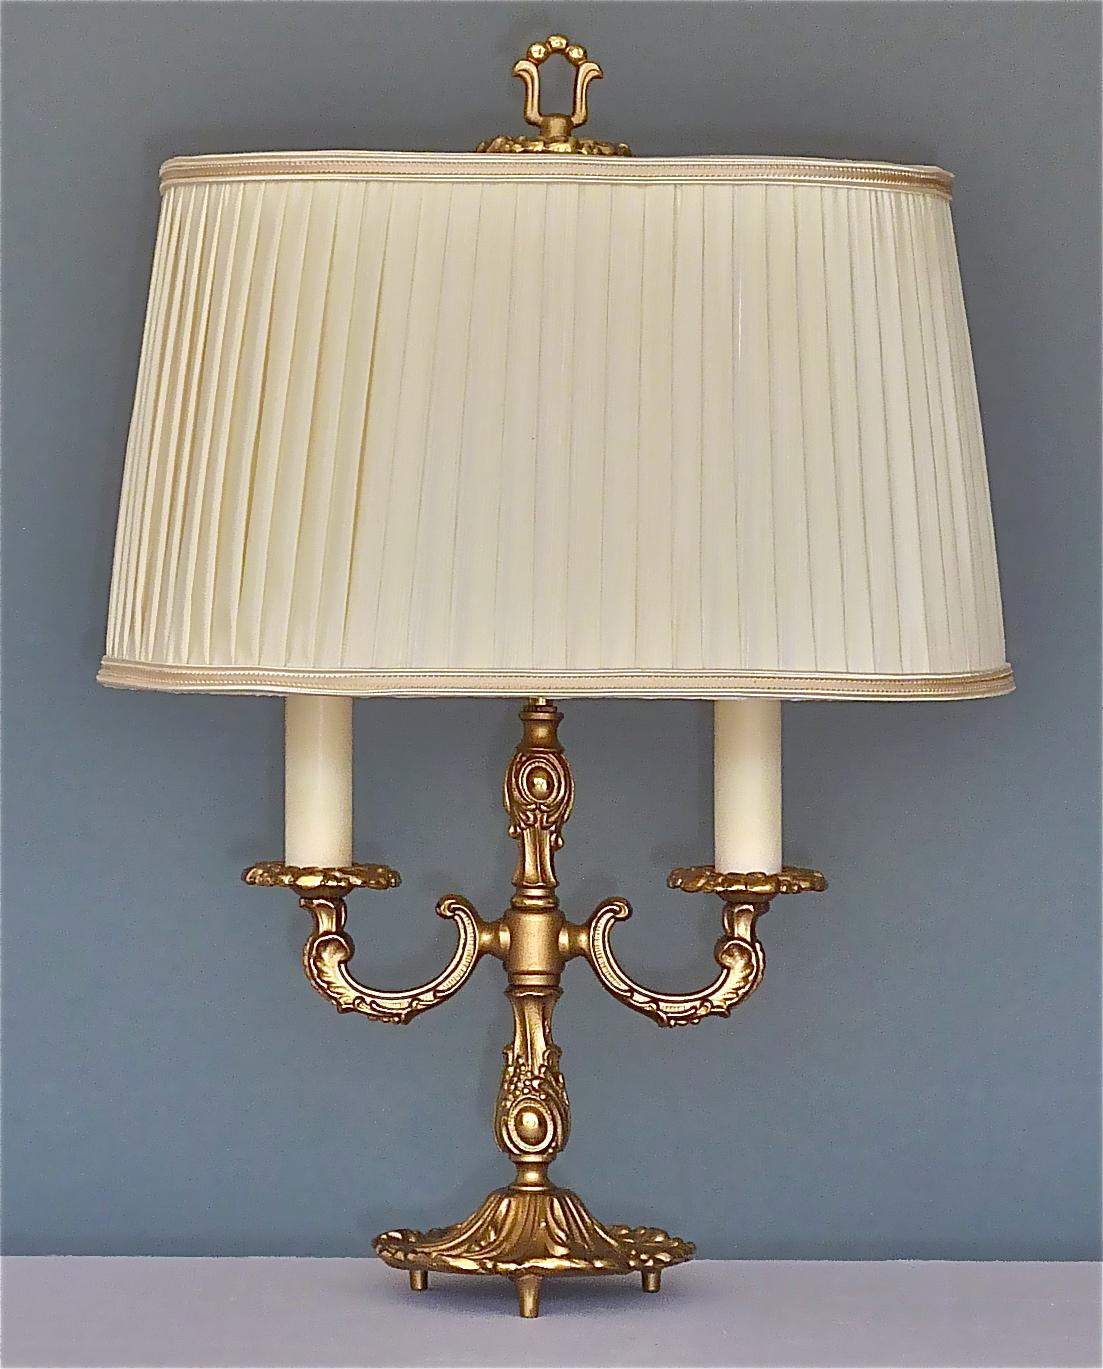 Baroque Maison Jansen Style Midcentury Table Lamp Brass Leaf Decor Germany 1950s For Sale 6